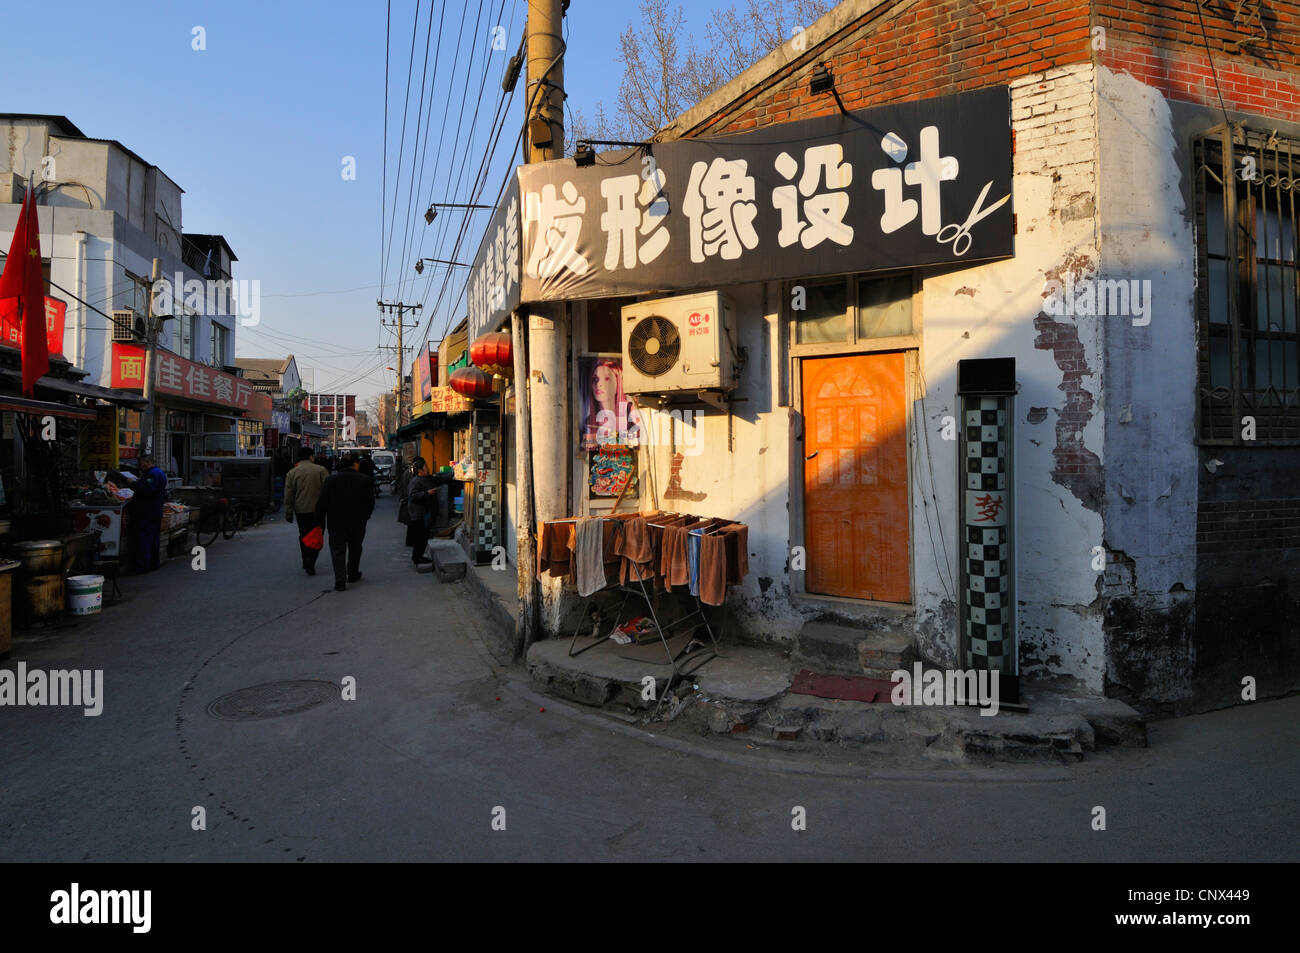 Shops and apartments in part of the network of old streets and buildings (hutongs) still existing in Beijing, China. Stock Photo